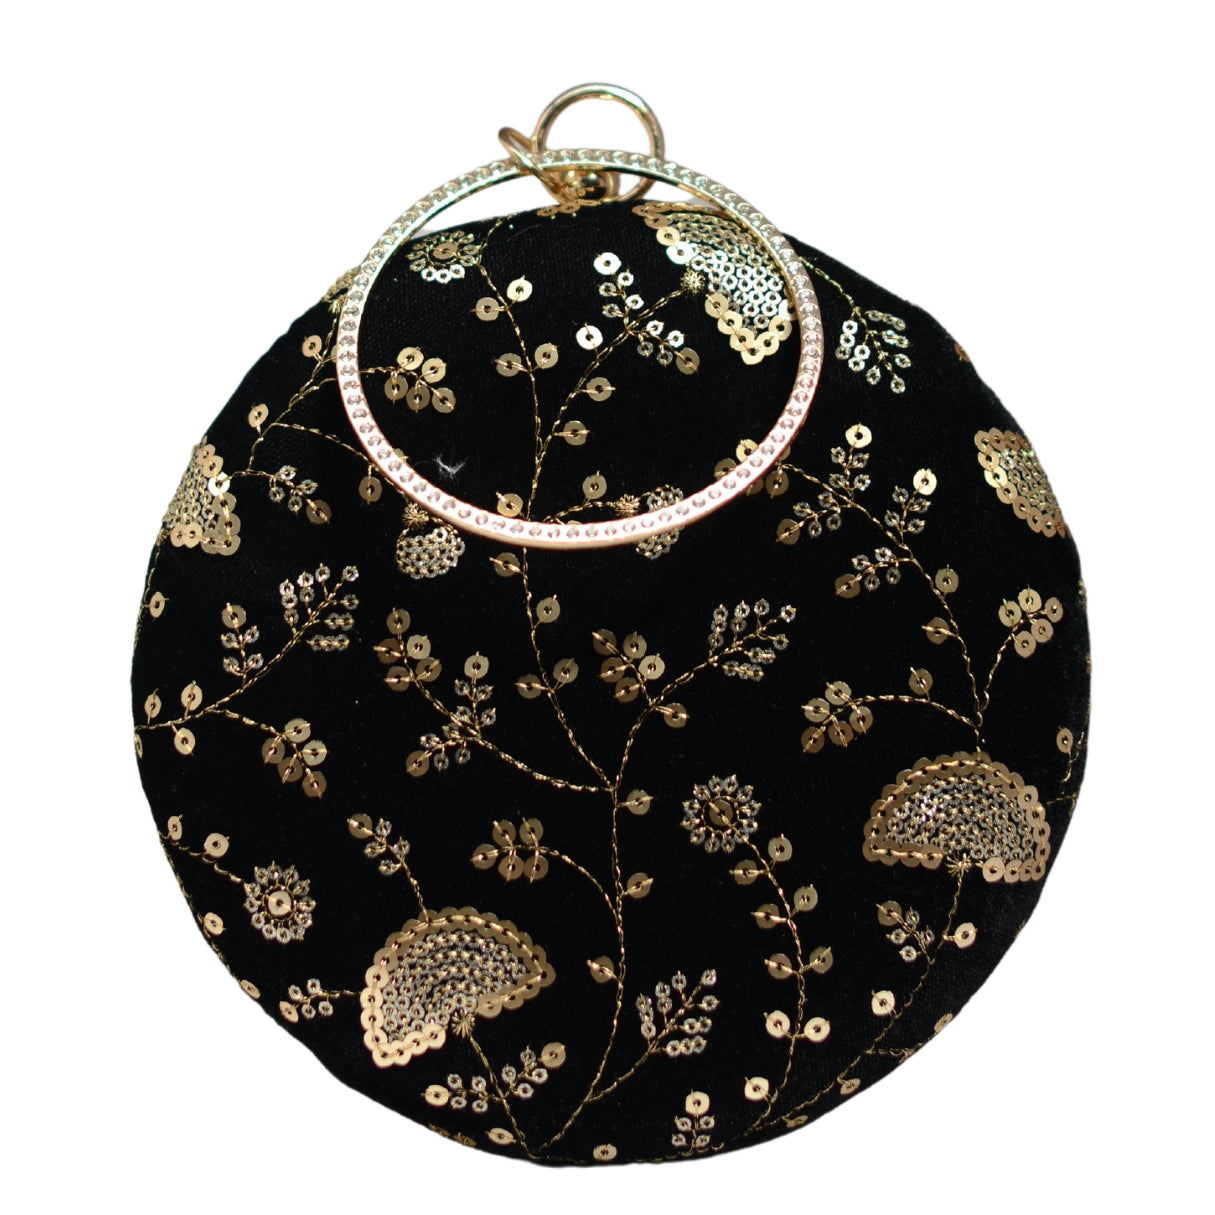 Black And Golden Embroidery Round Clutch